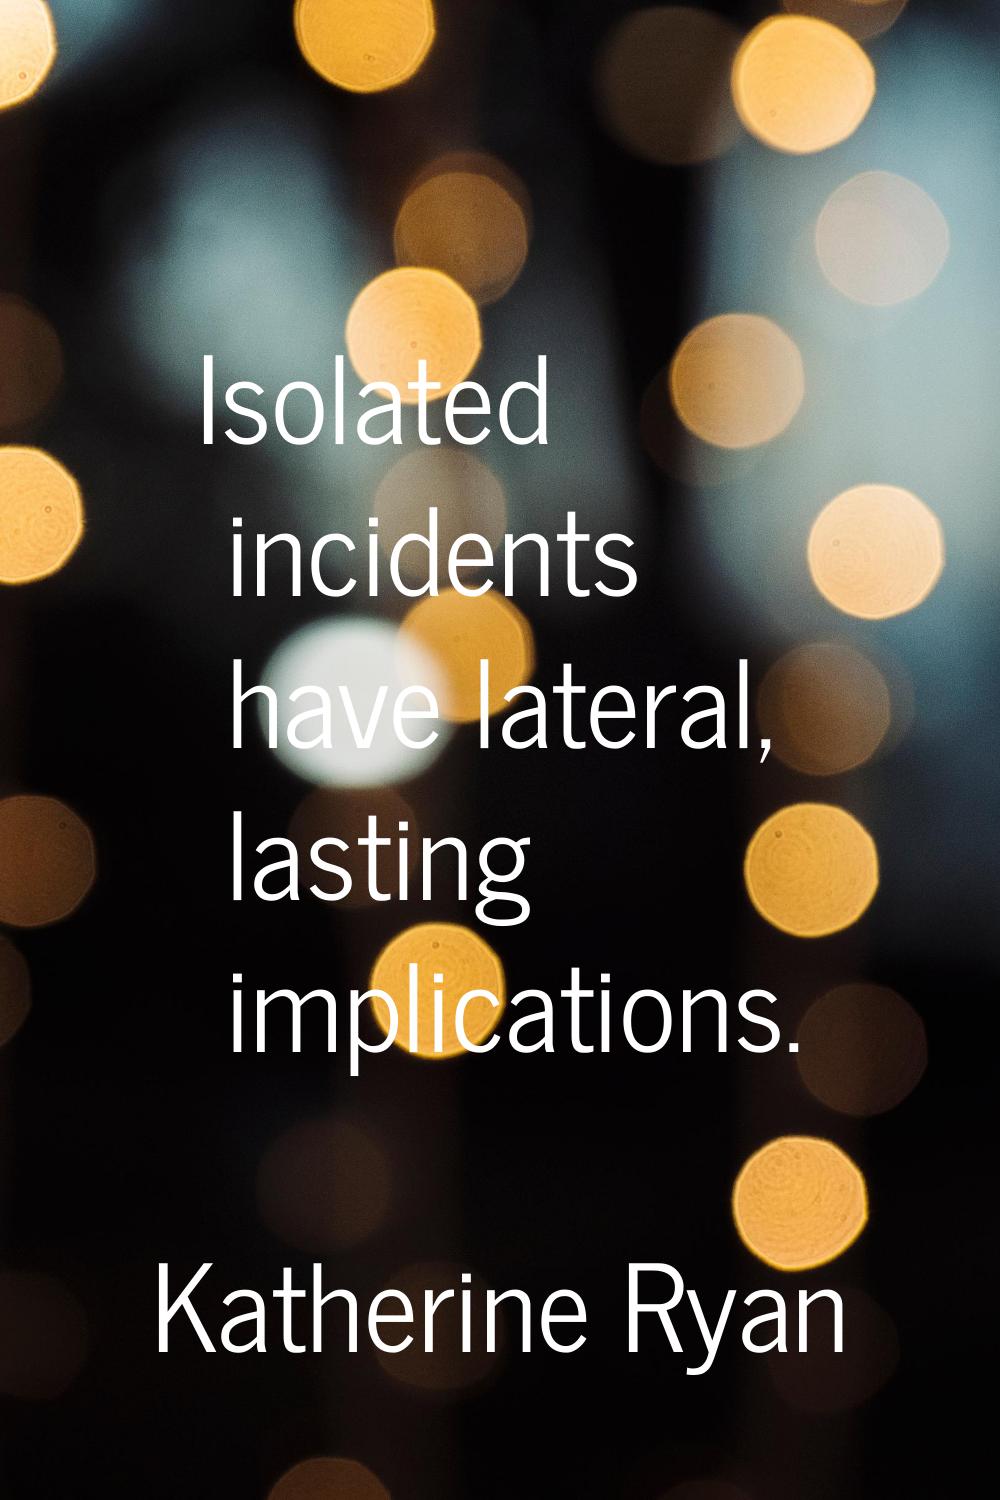 Isolated incidents have lateral, lasting implications.